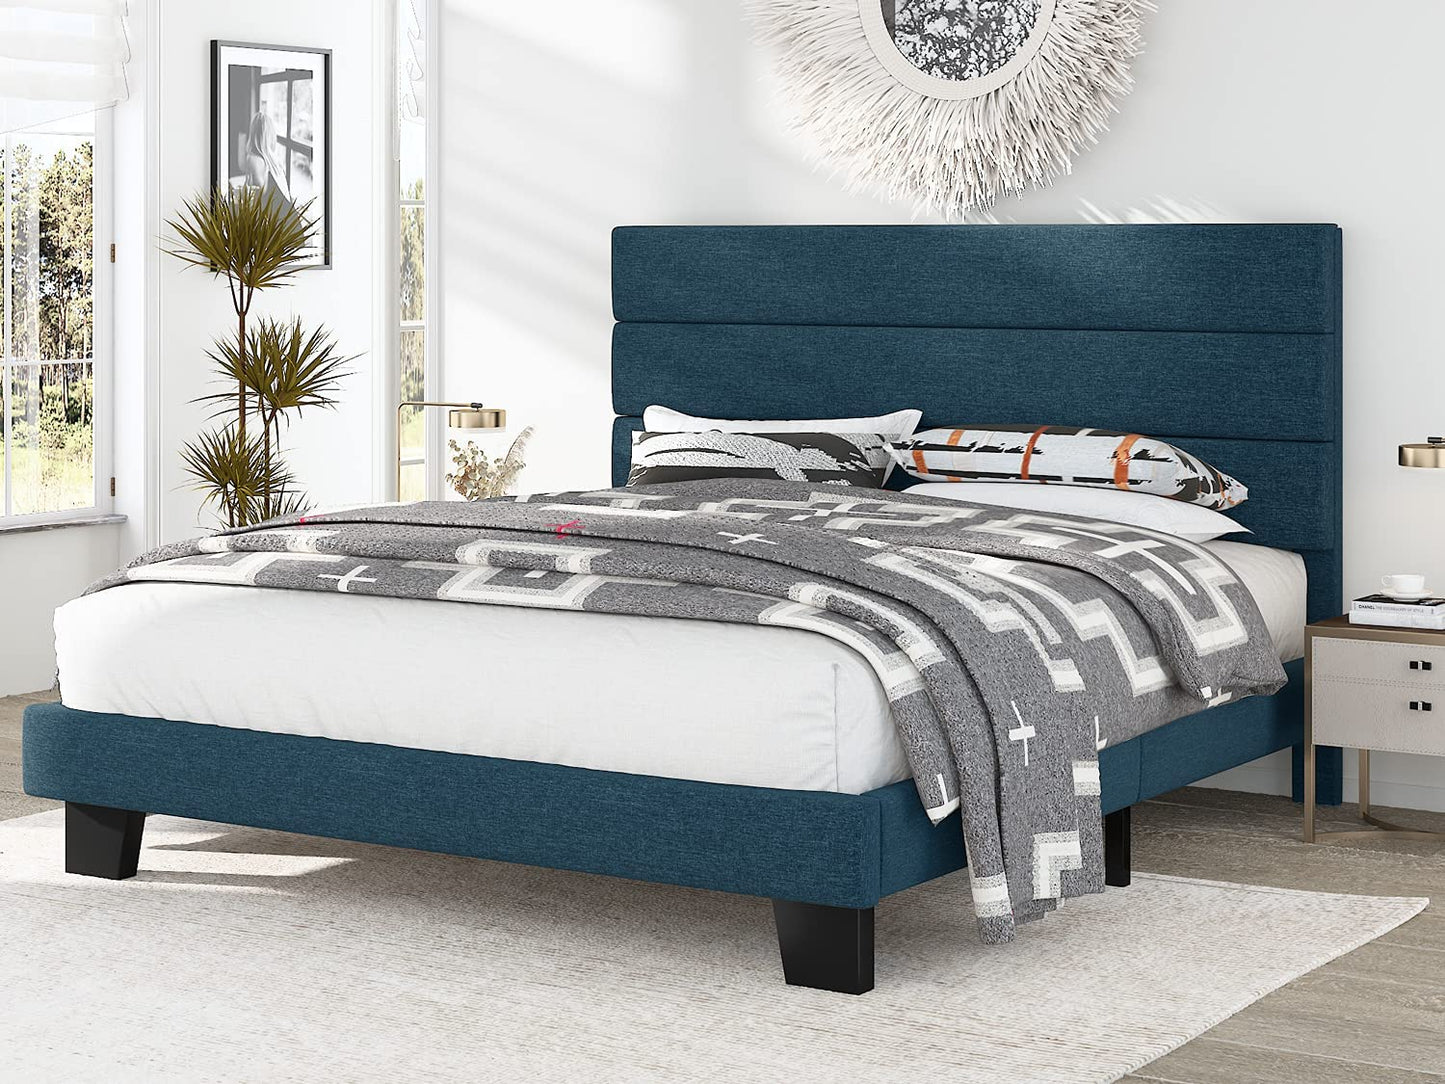 Allewie King Size Fabric Fully Upholstered Platform Bed Frame with Headboard and Strong Wooden Slats, Navy Blue